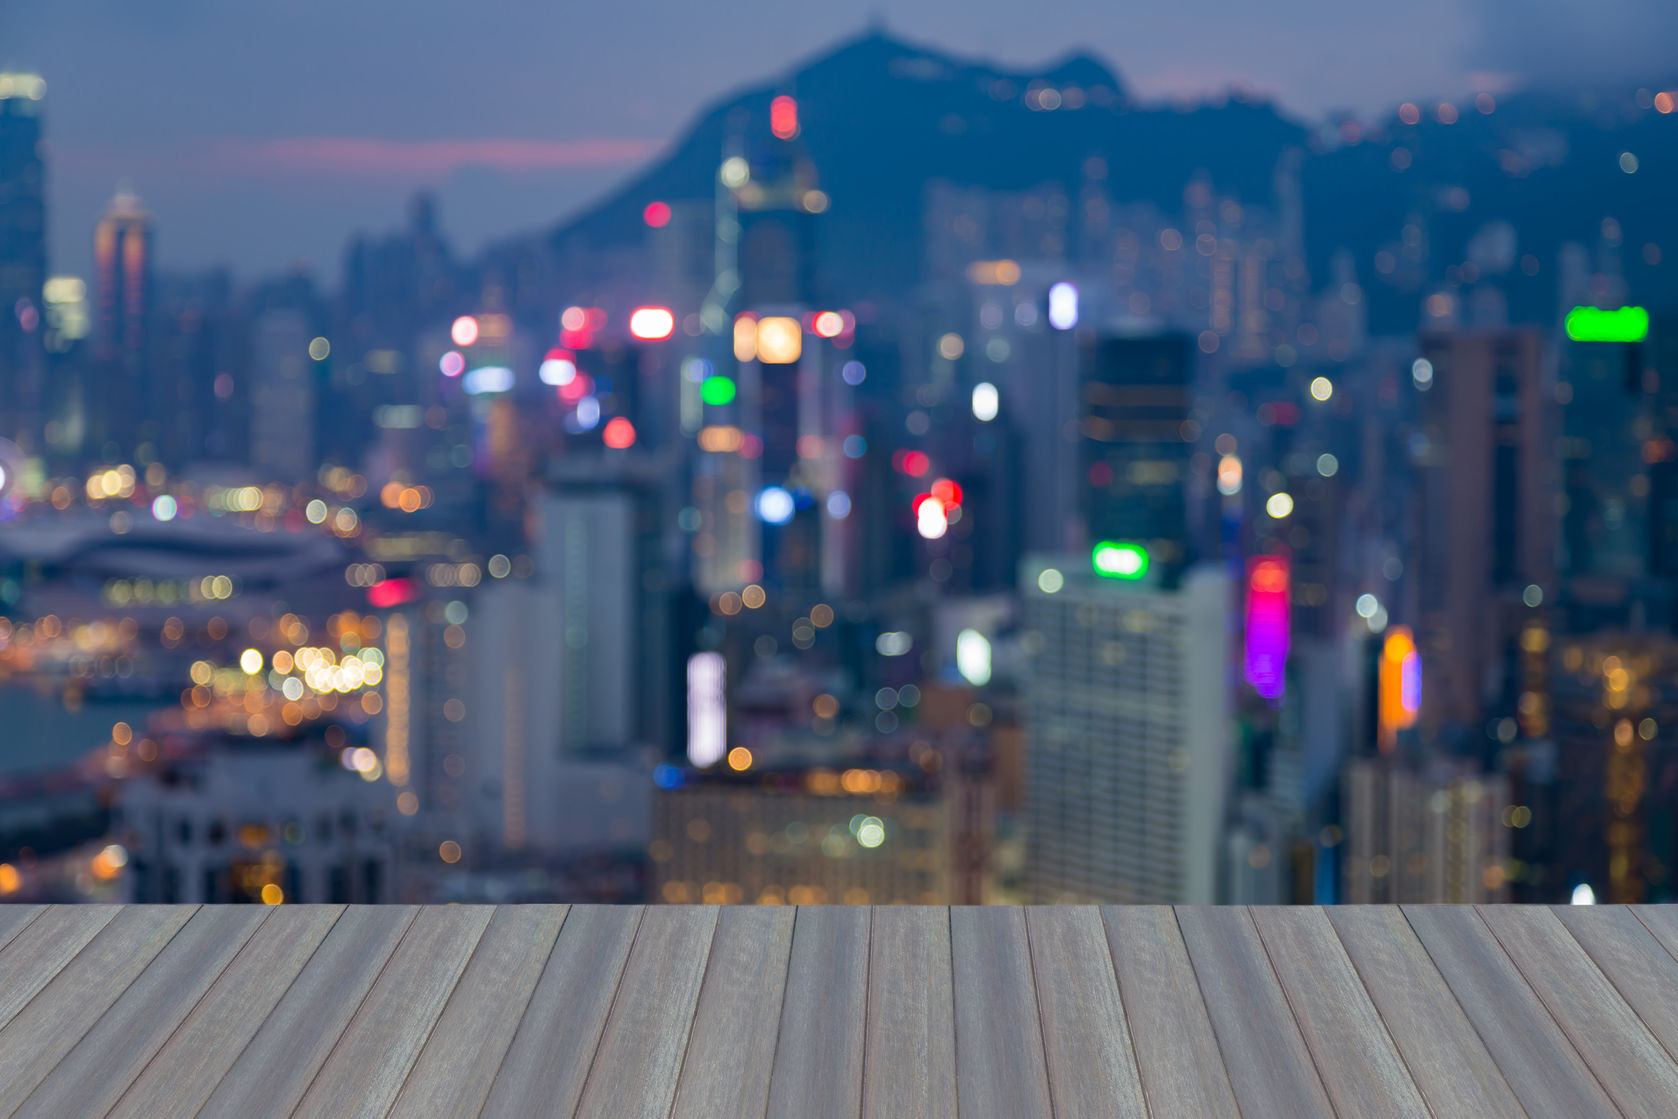 International Tax Cooperation Spurs Key Development Of The Hong Kong Asset Management Industry – Level Playing Field For Onshore And Offshore Funds.